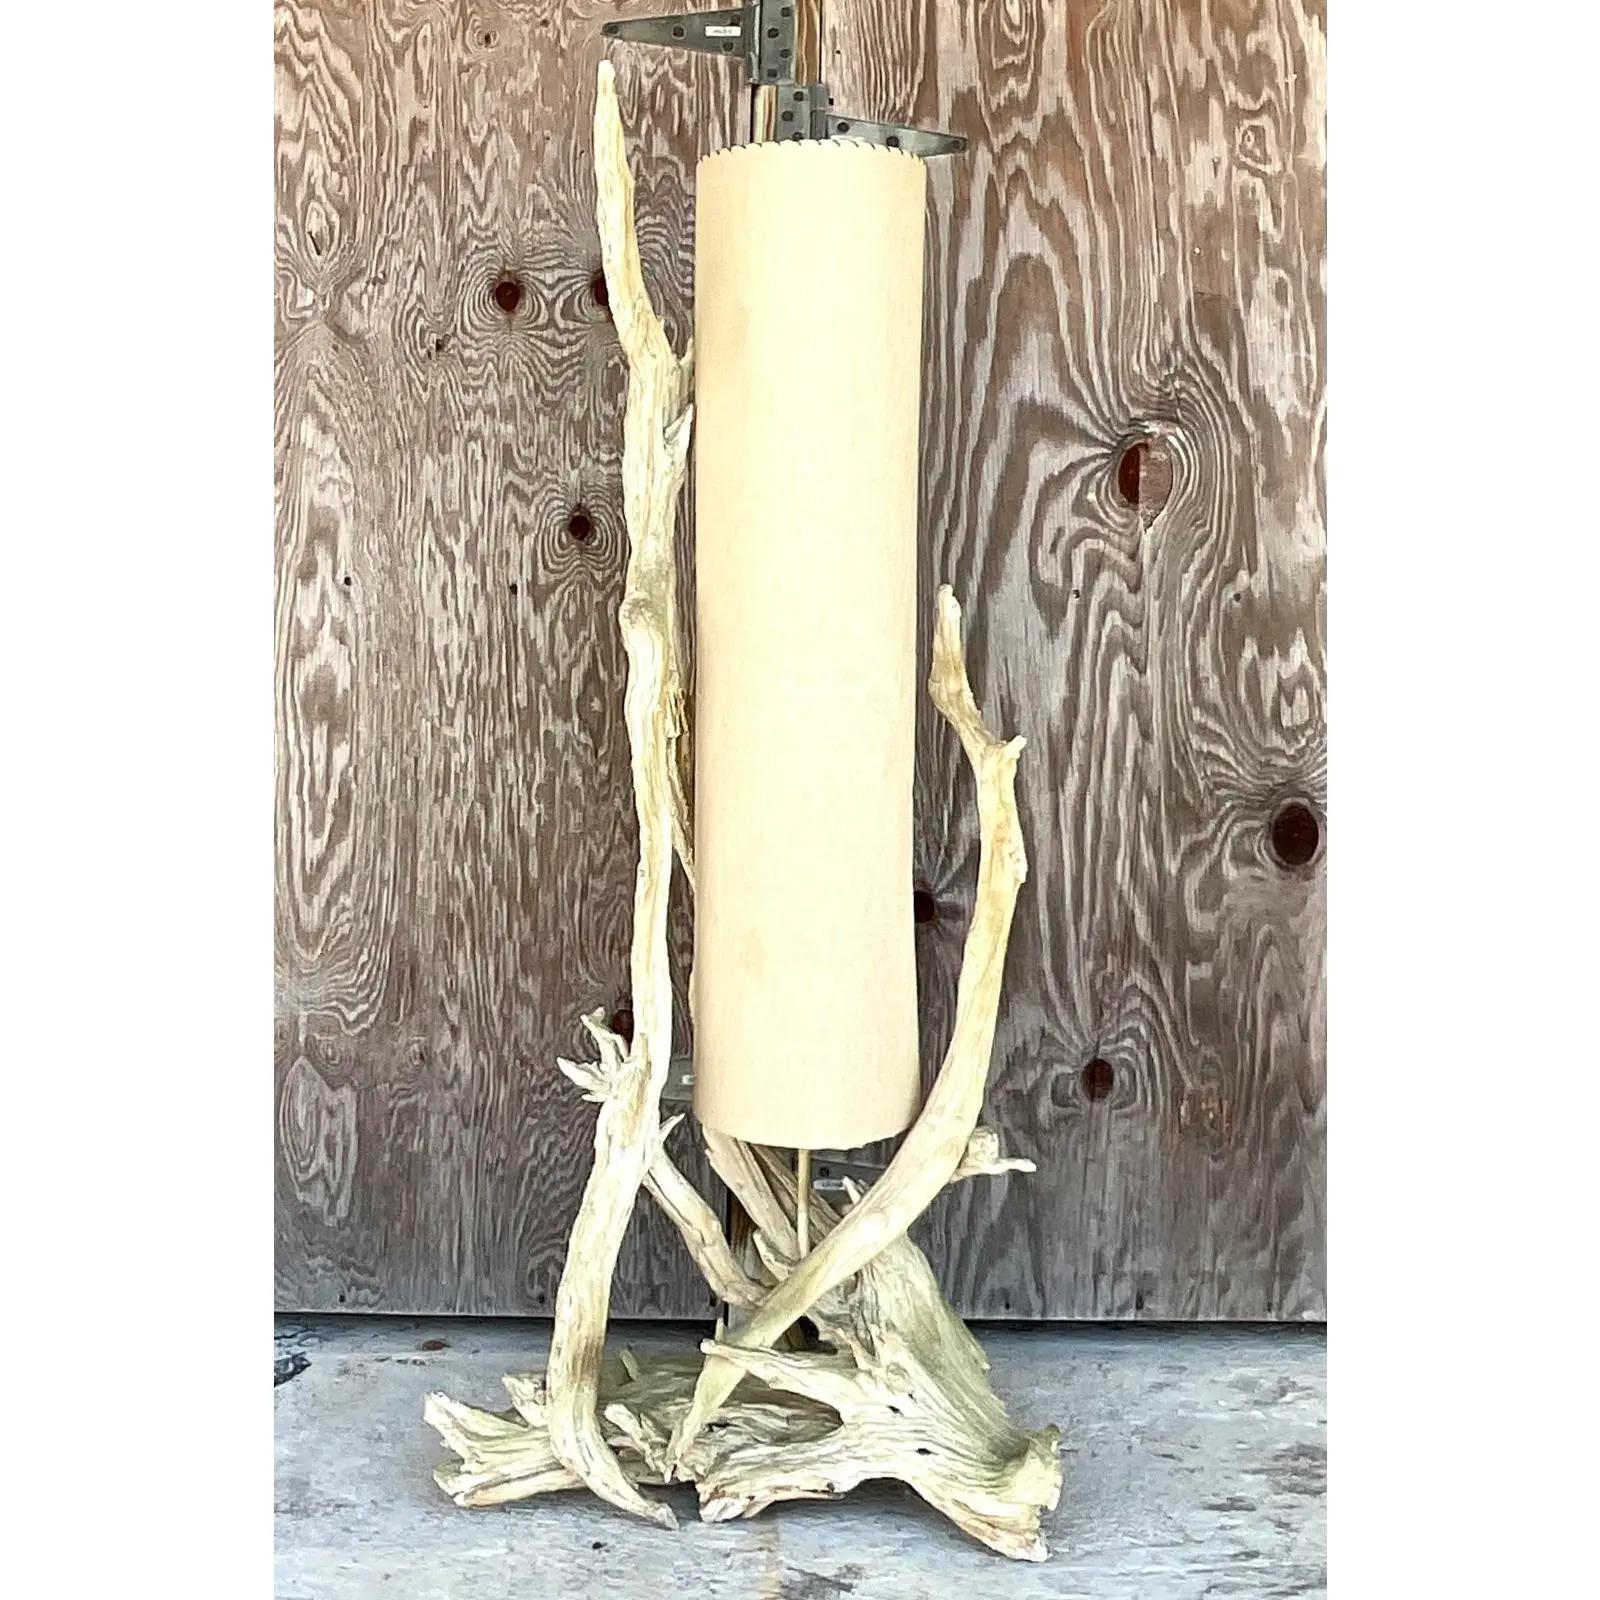 Incredible vintage Boho floor lamp. A chic MCM driftwood lamp with super long shade. Whipstitch trim to the shade. Beautiful light colored natural driftwood. Acquired from a Palm Beach estate.

The lamp is in great vintage condition. Minor scuffs